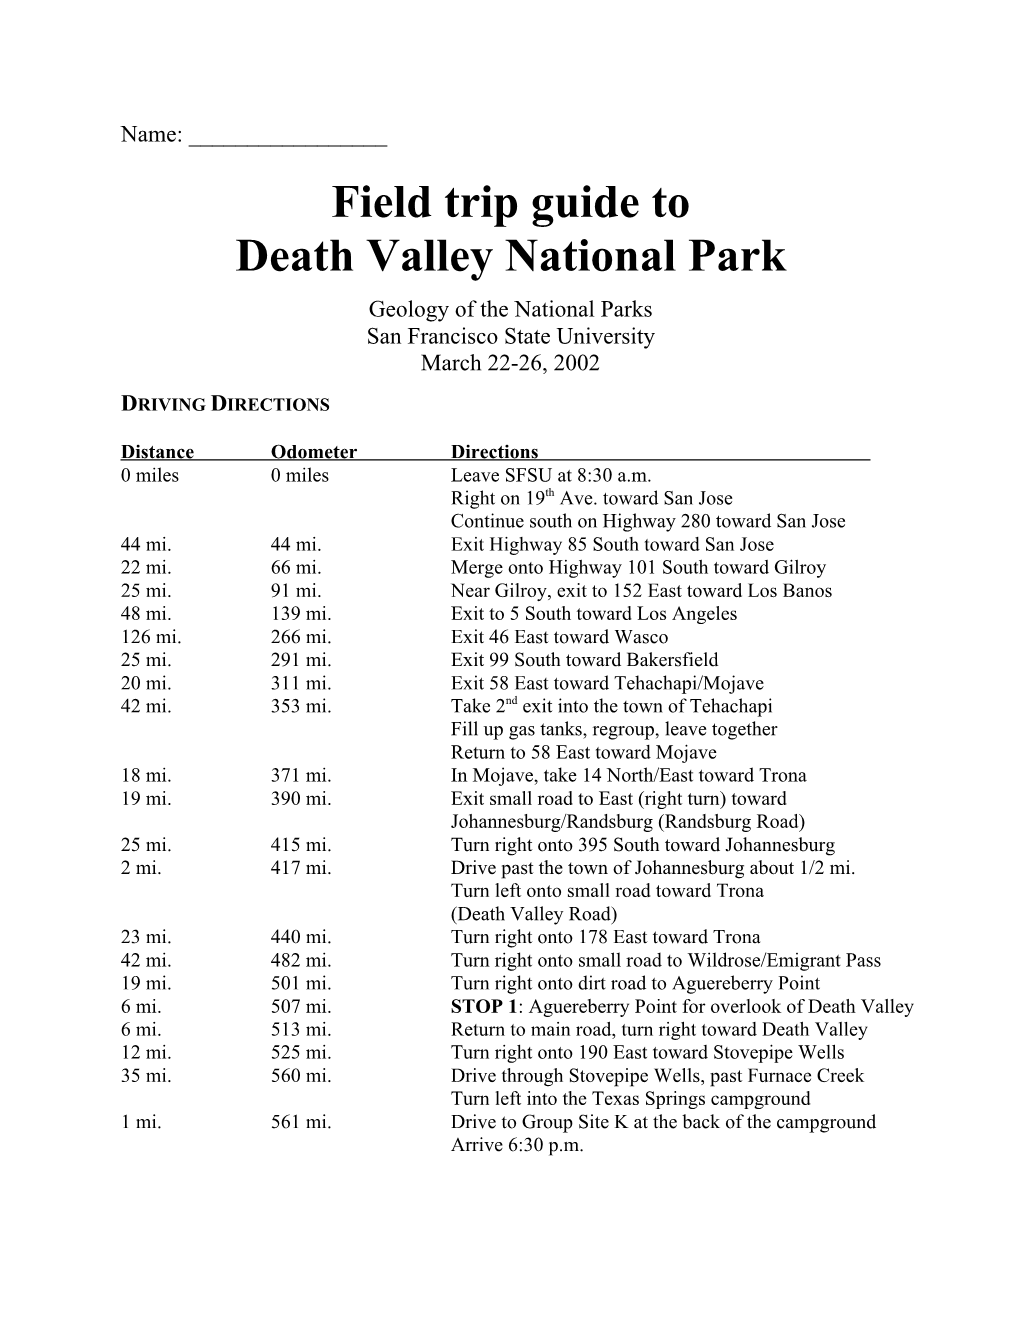 Death Valley Field Guide